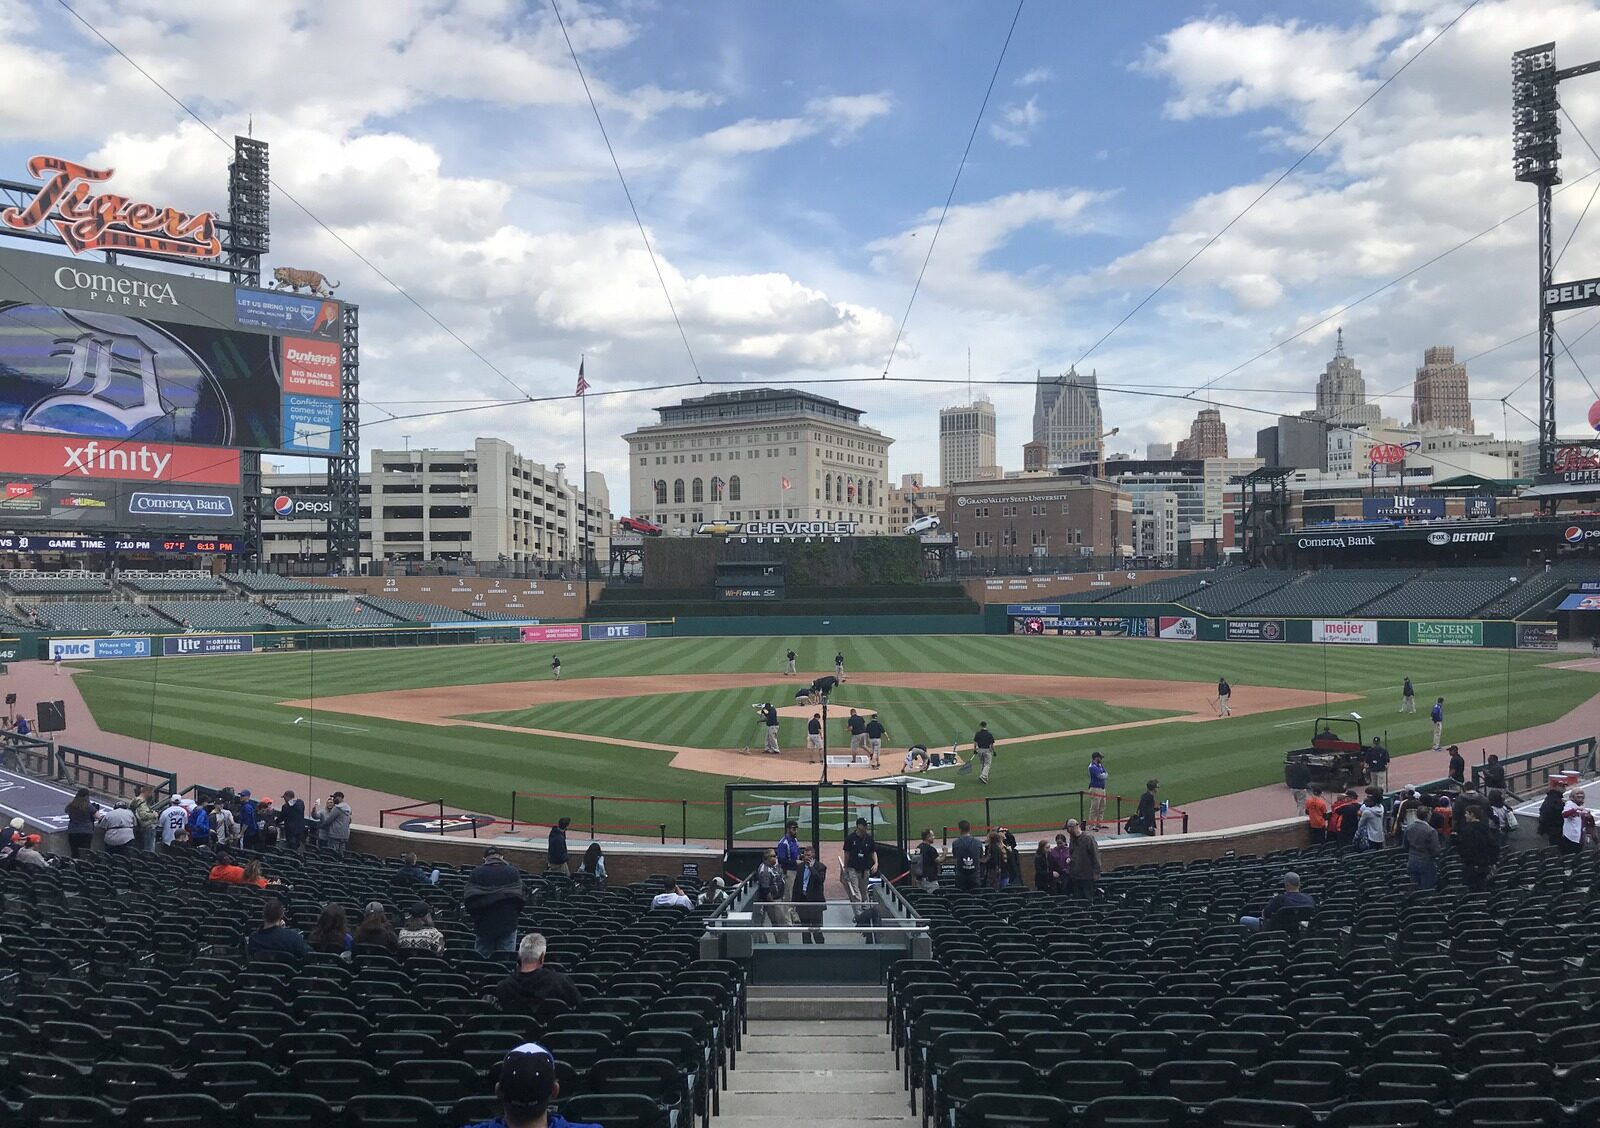 Comerica Park interior behind home plate